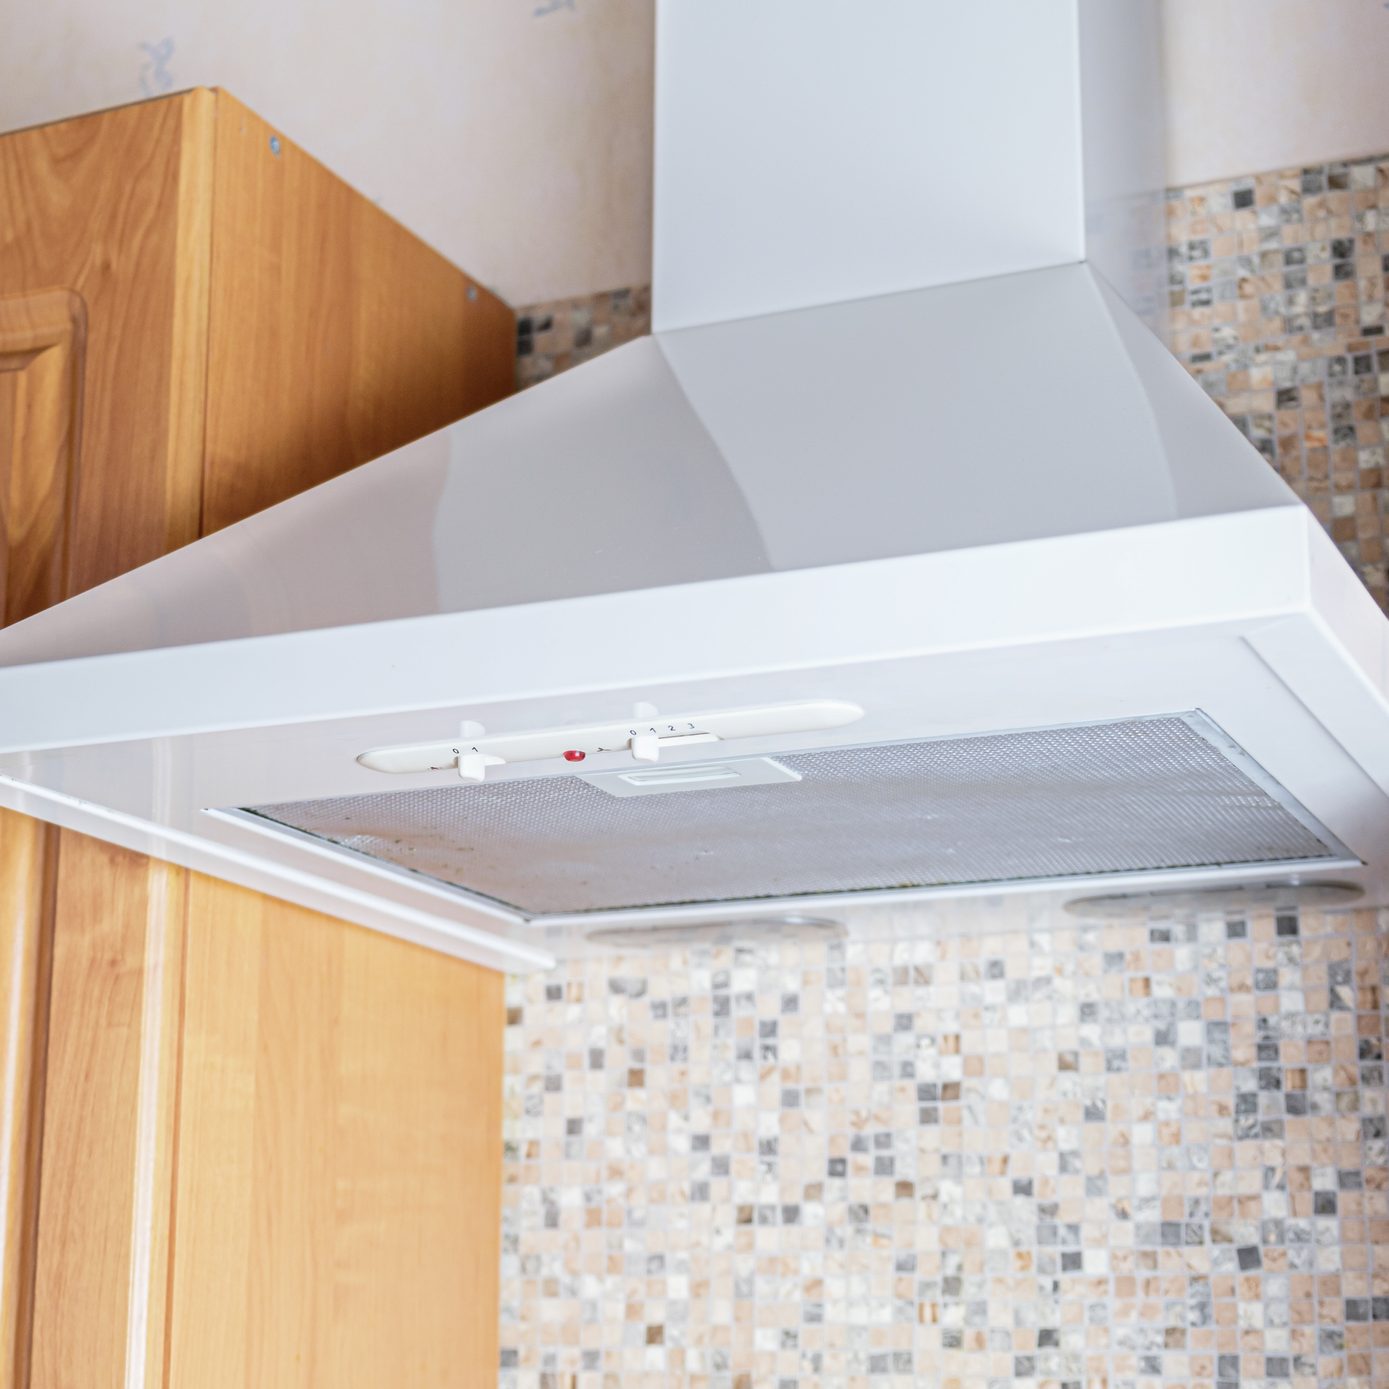 How To Replace a Range Hood Filter (DIY)